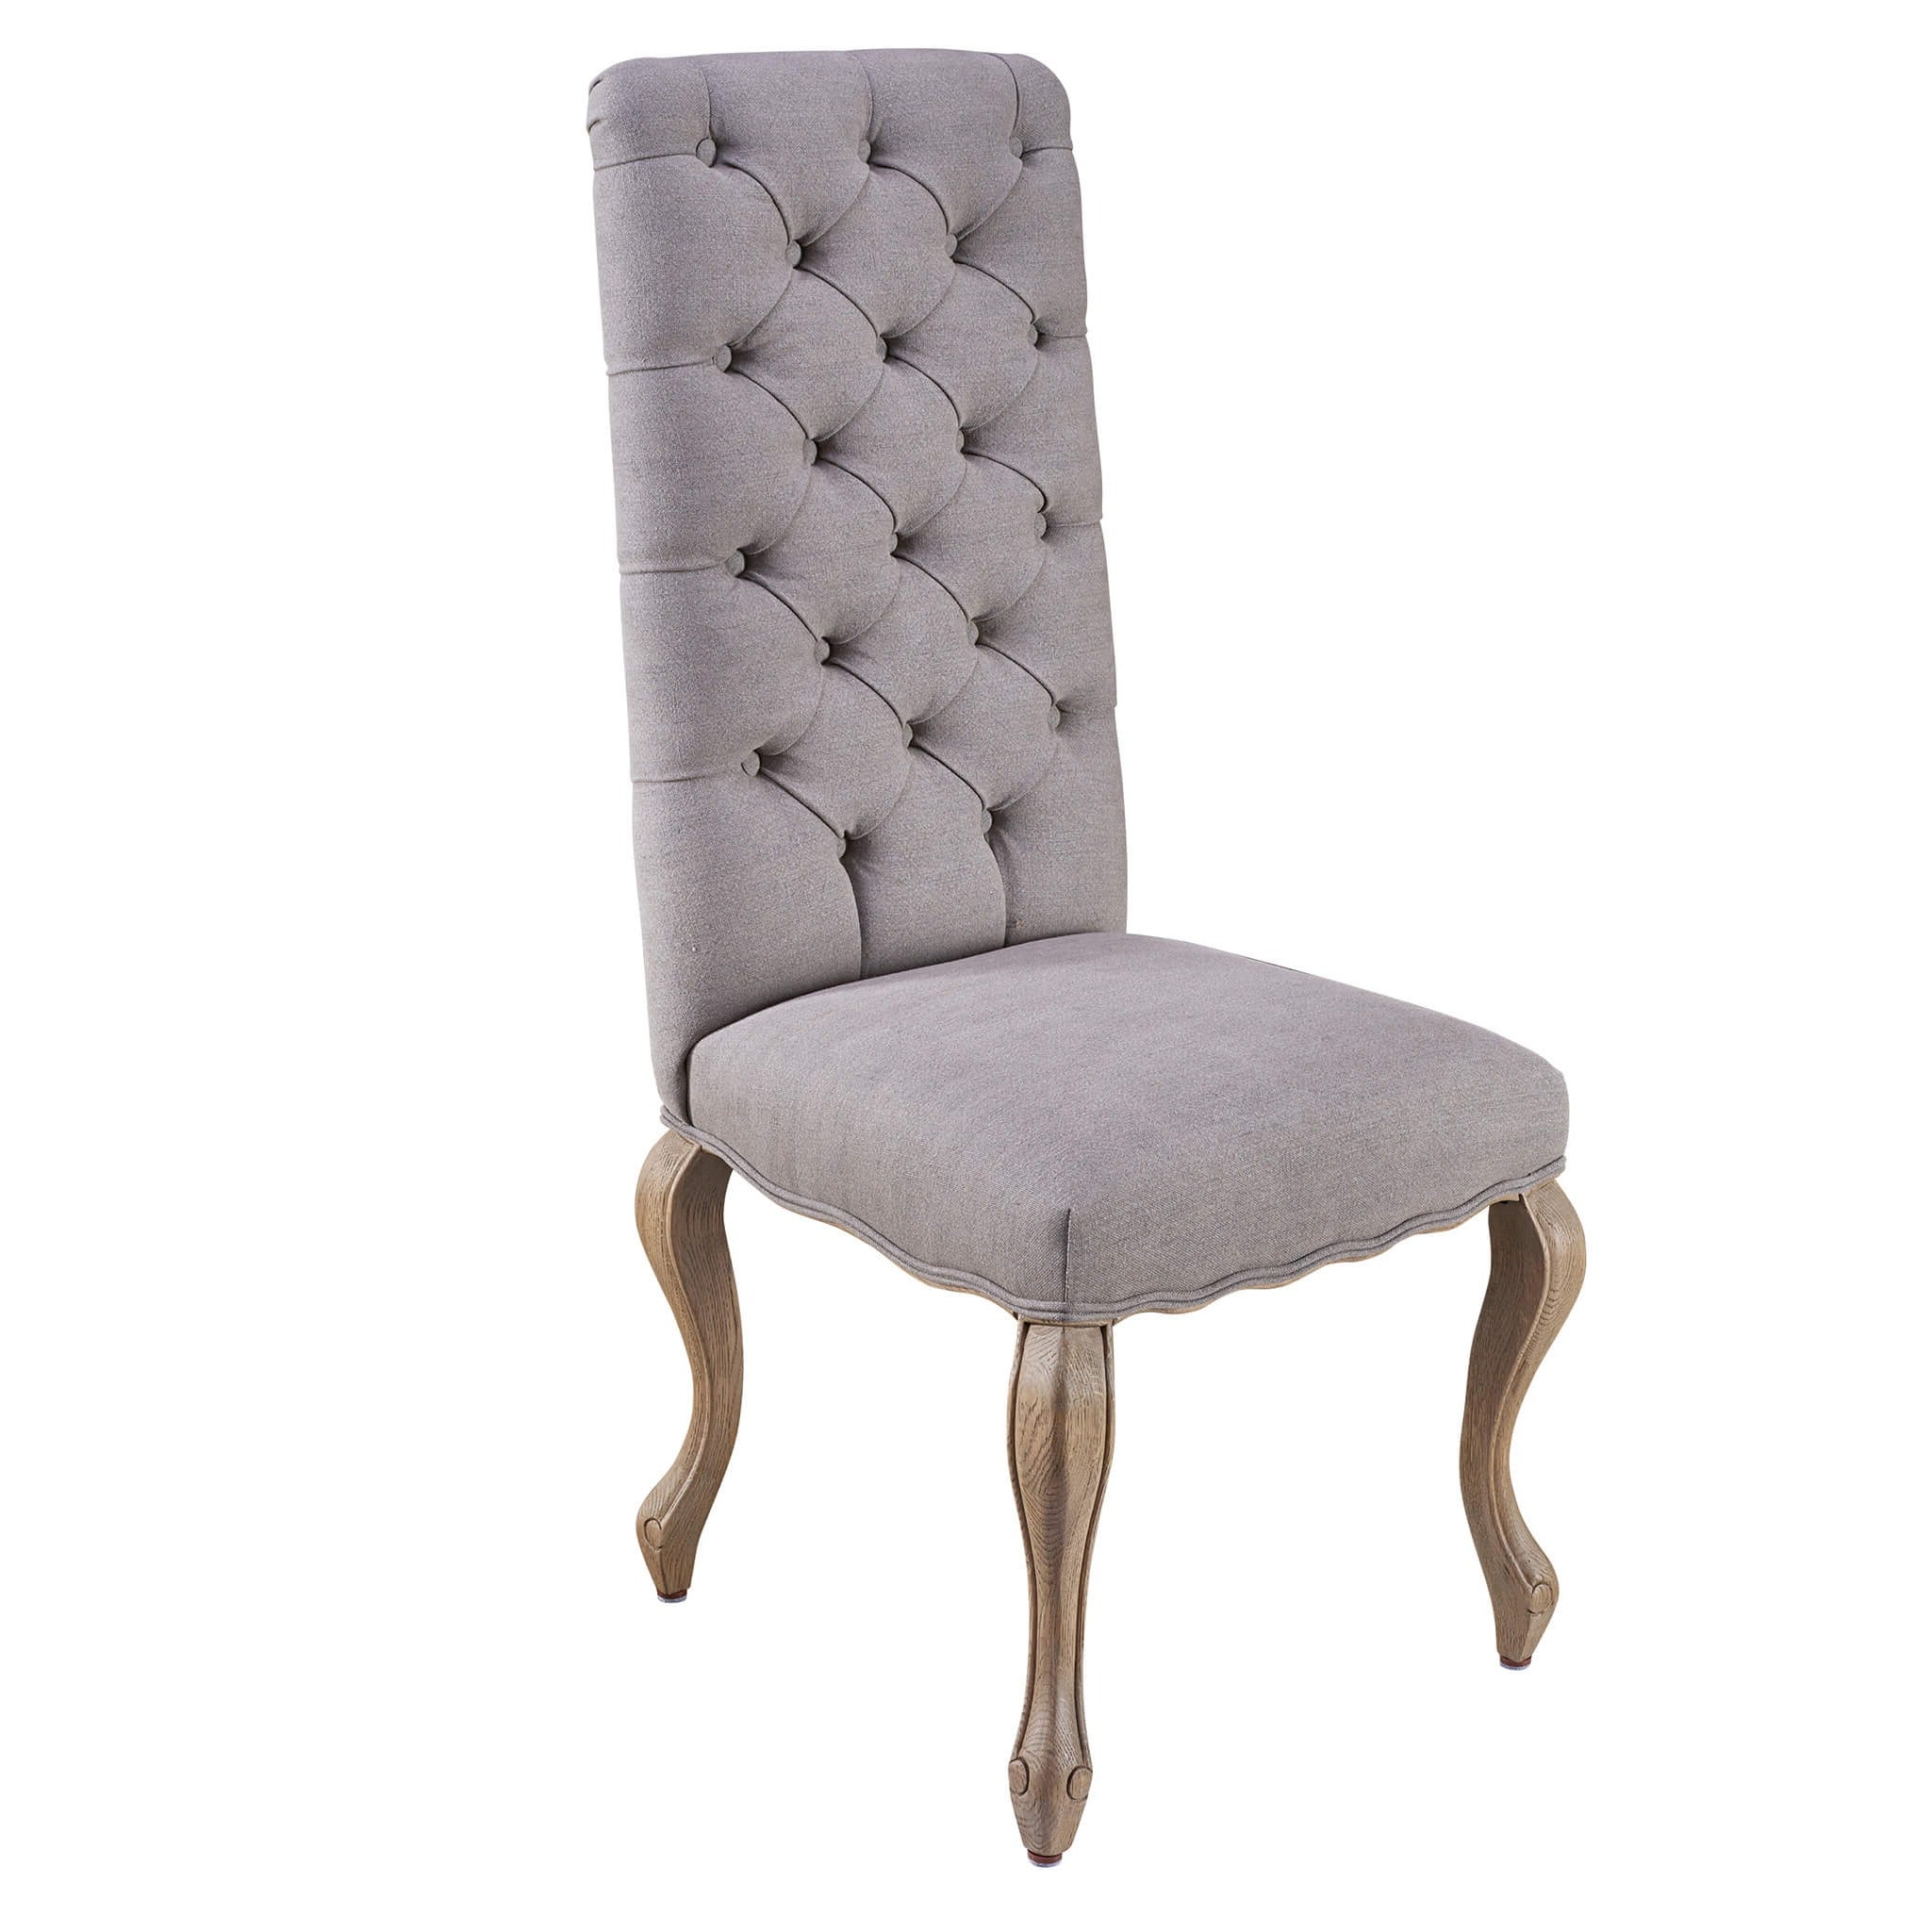 Upholstered Dining Chair In Dove Grey Linen